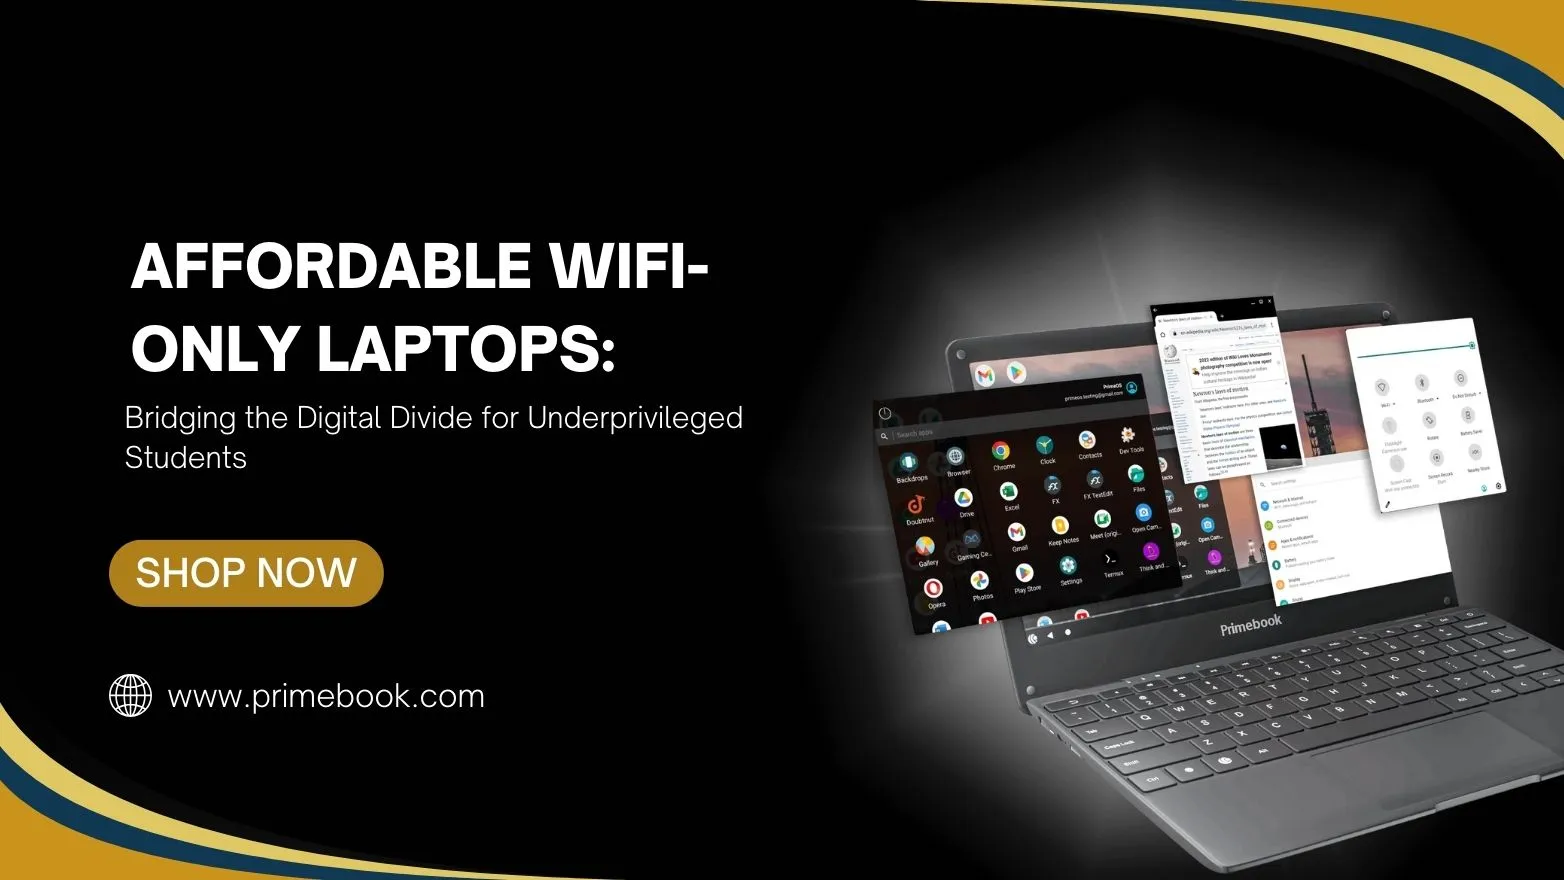 Affordable WiFi-Only Laptops: Bridging the Digital Divide for Underprivileged Students